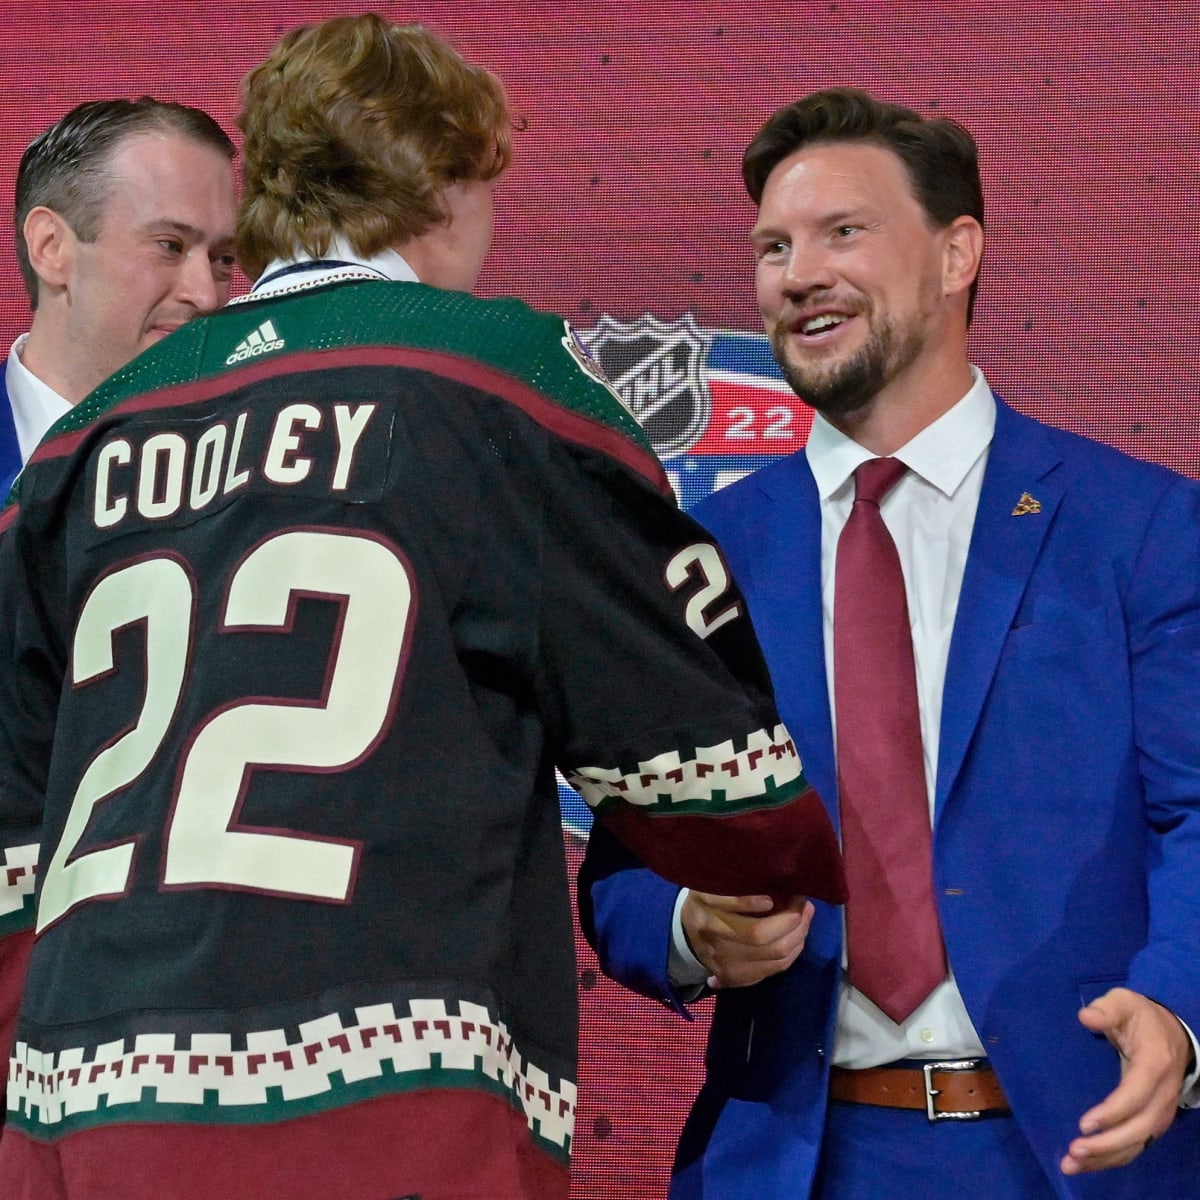 Coyotes season preview: Cooley's development crucial for success